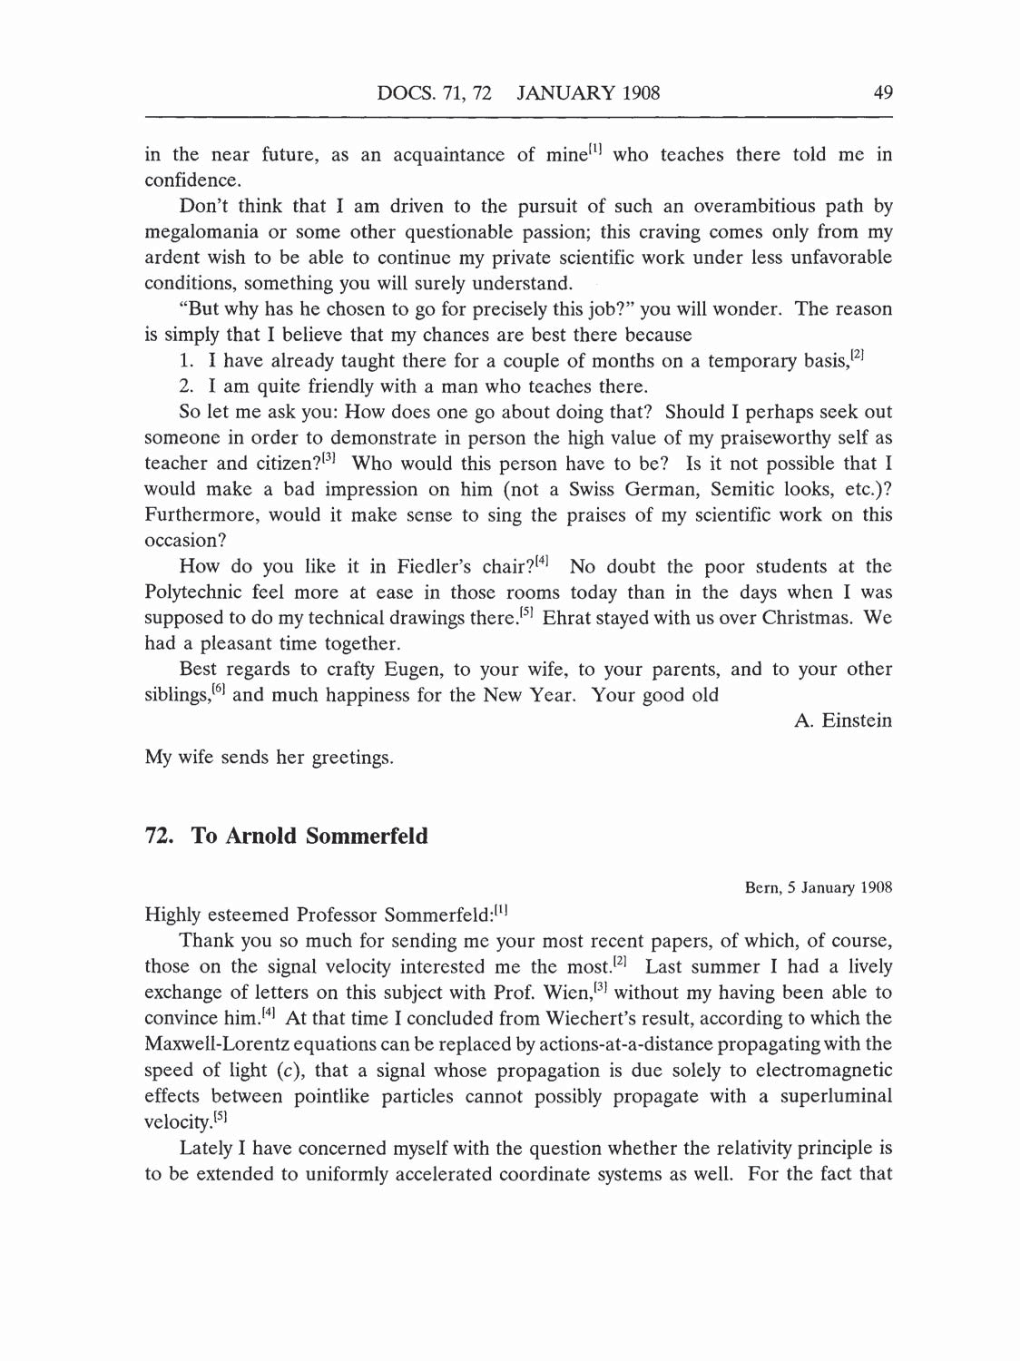 Volume 5: The Swiss Years: Correspondence, 1902-1914 (English translation supplement) page 49